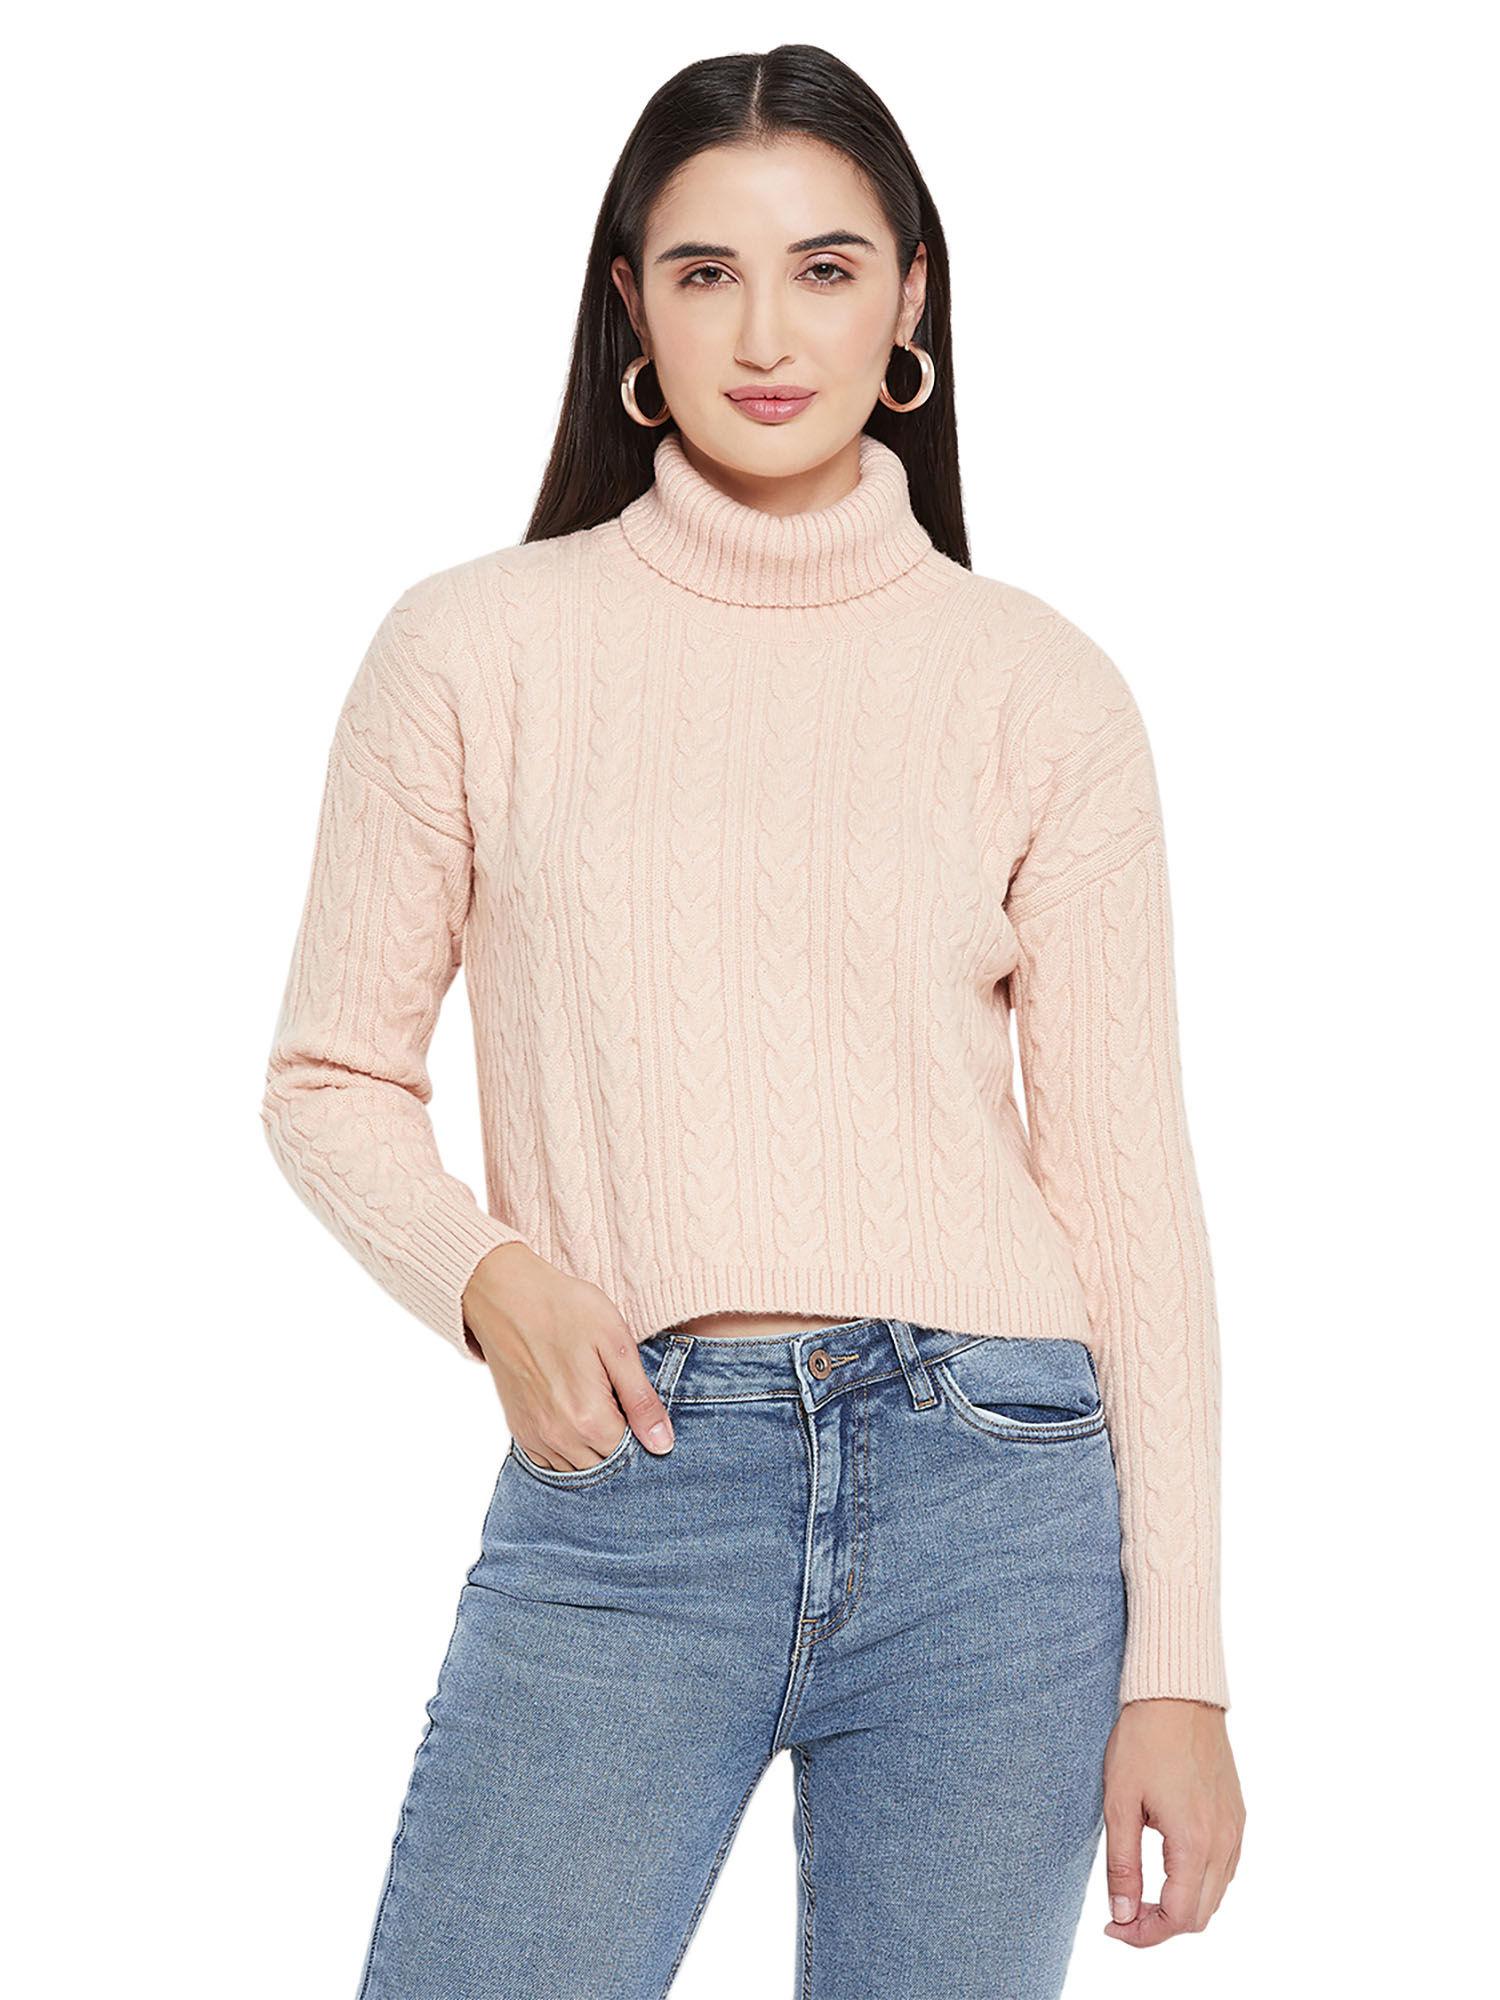 barcelona cable knit light peach turtle neck sweater